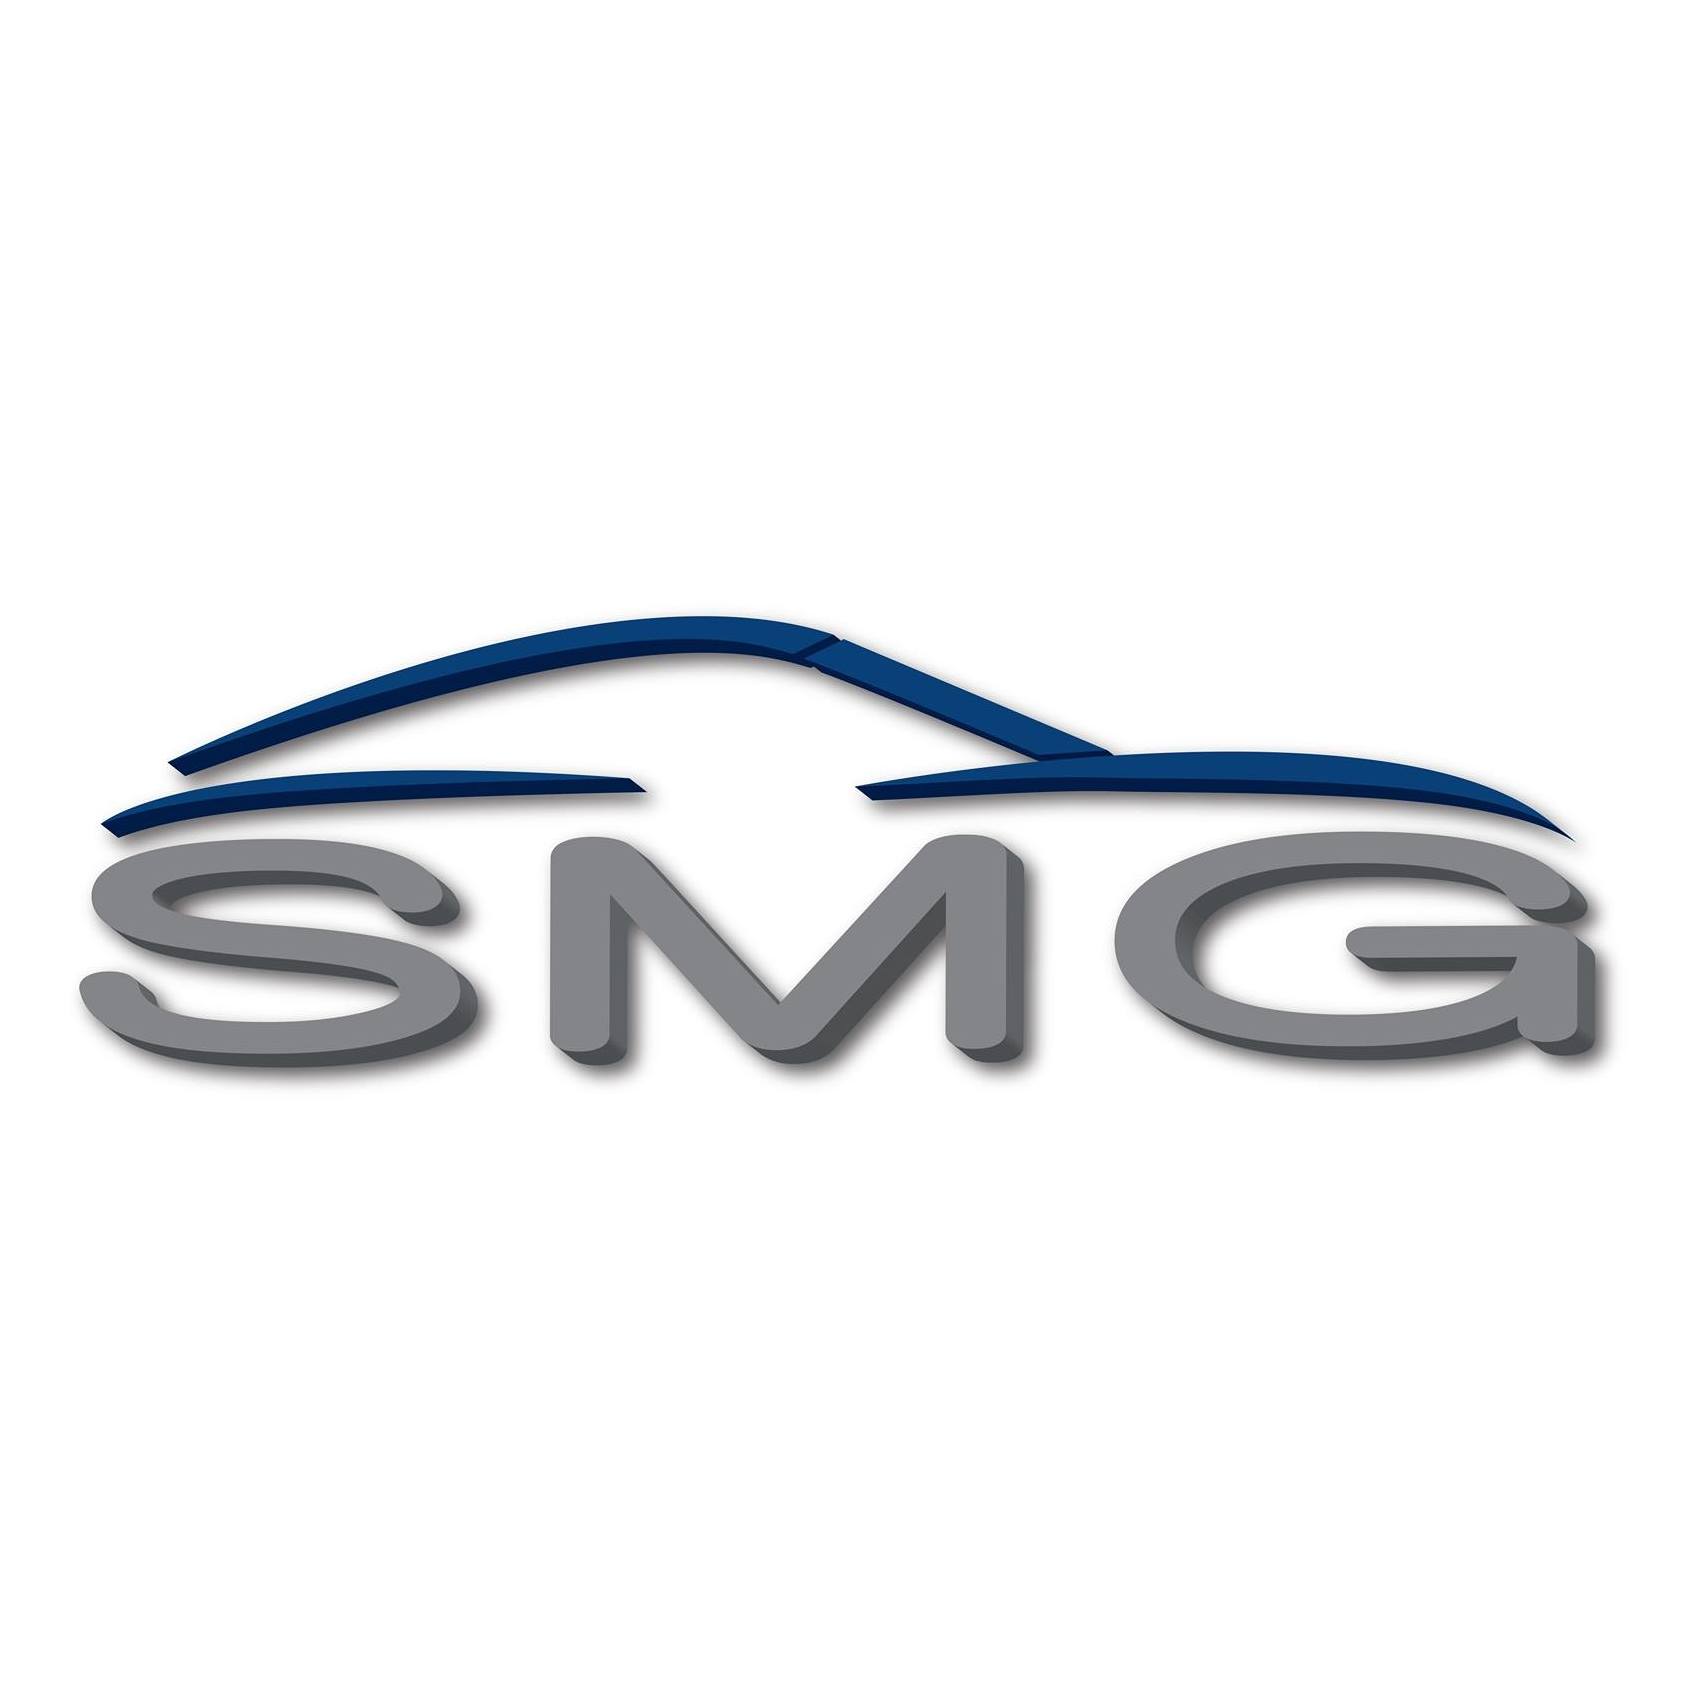 SMG Engineering Automotive Co.